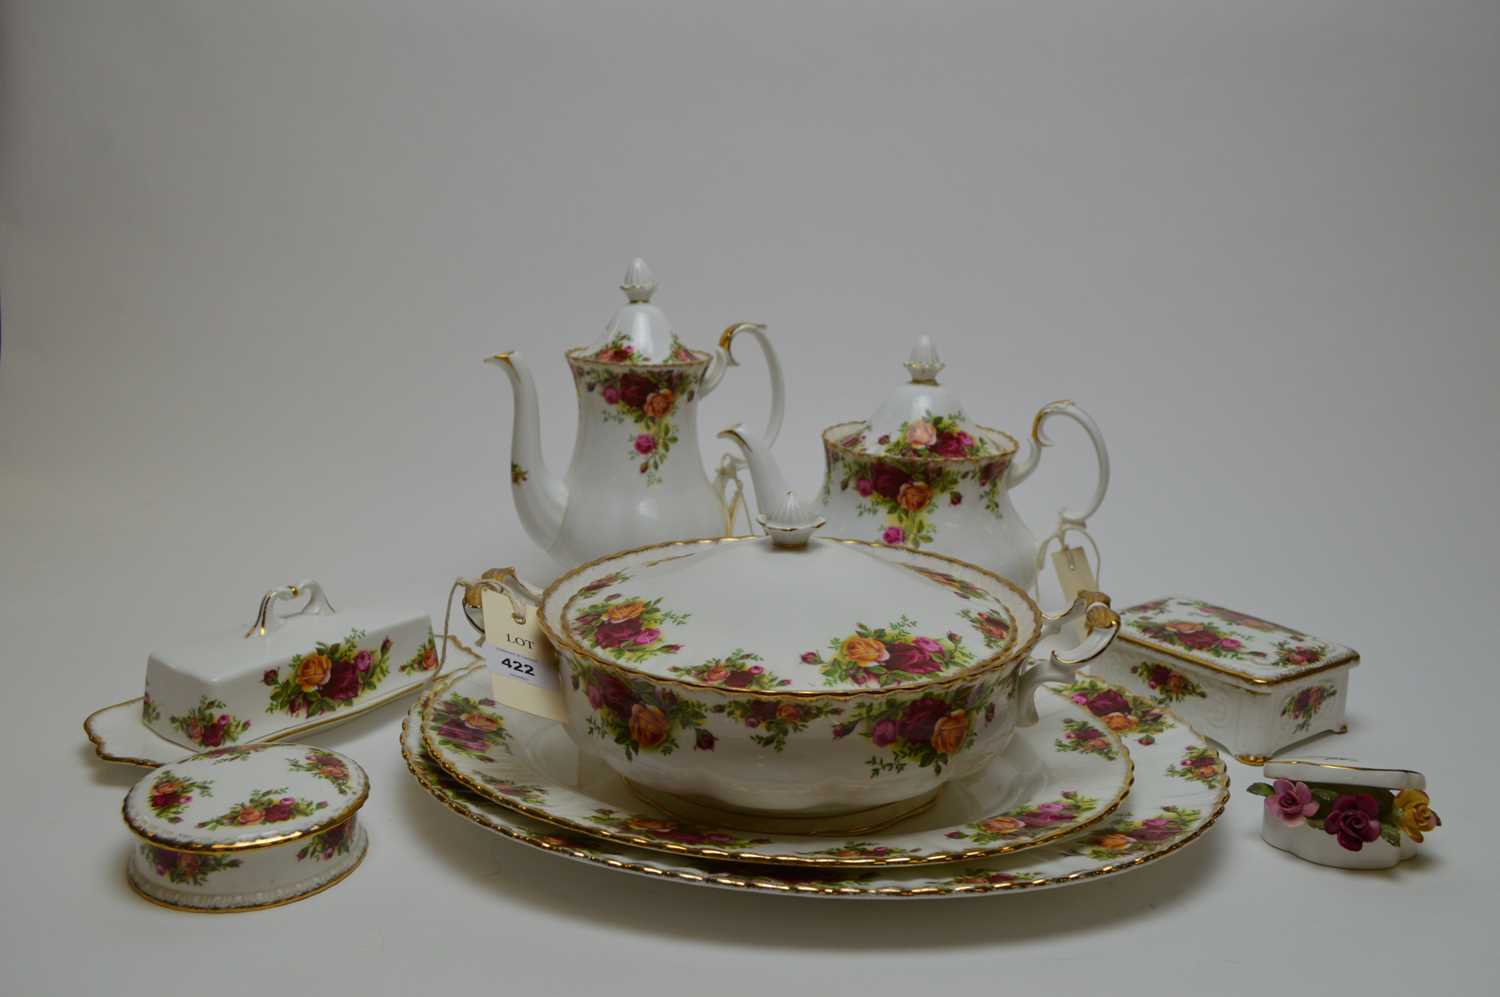 Lot 422 - An extensive Royal Albert 'Old Country Roses' part dinner and tea service